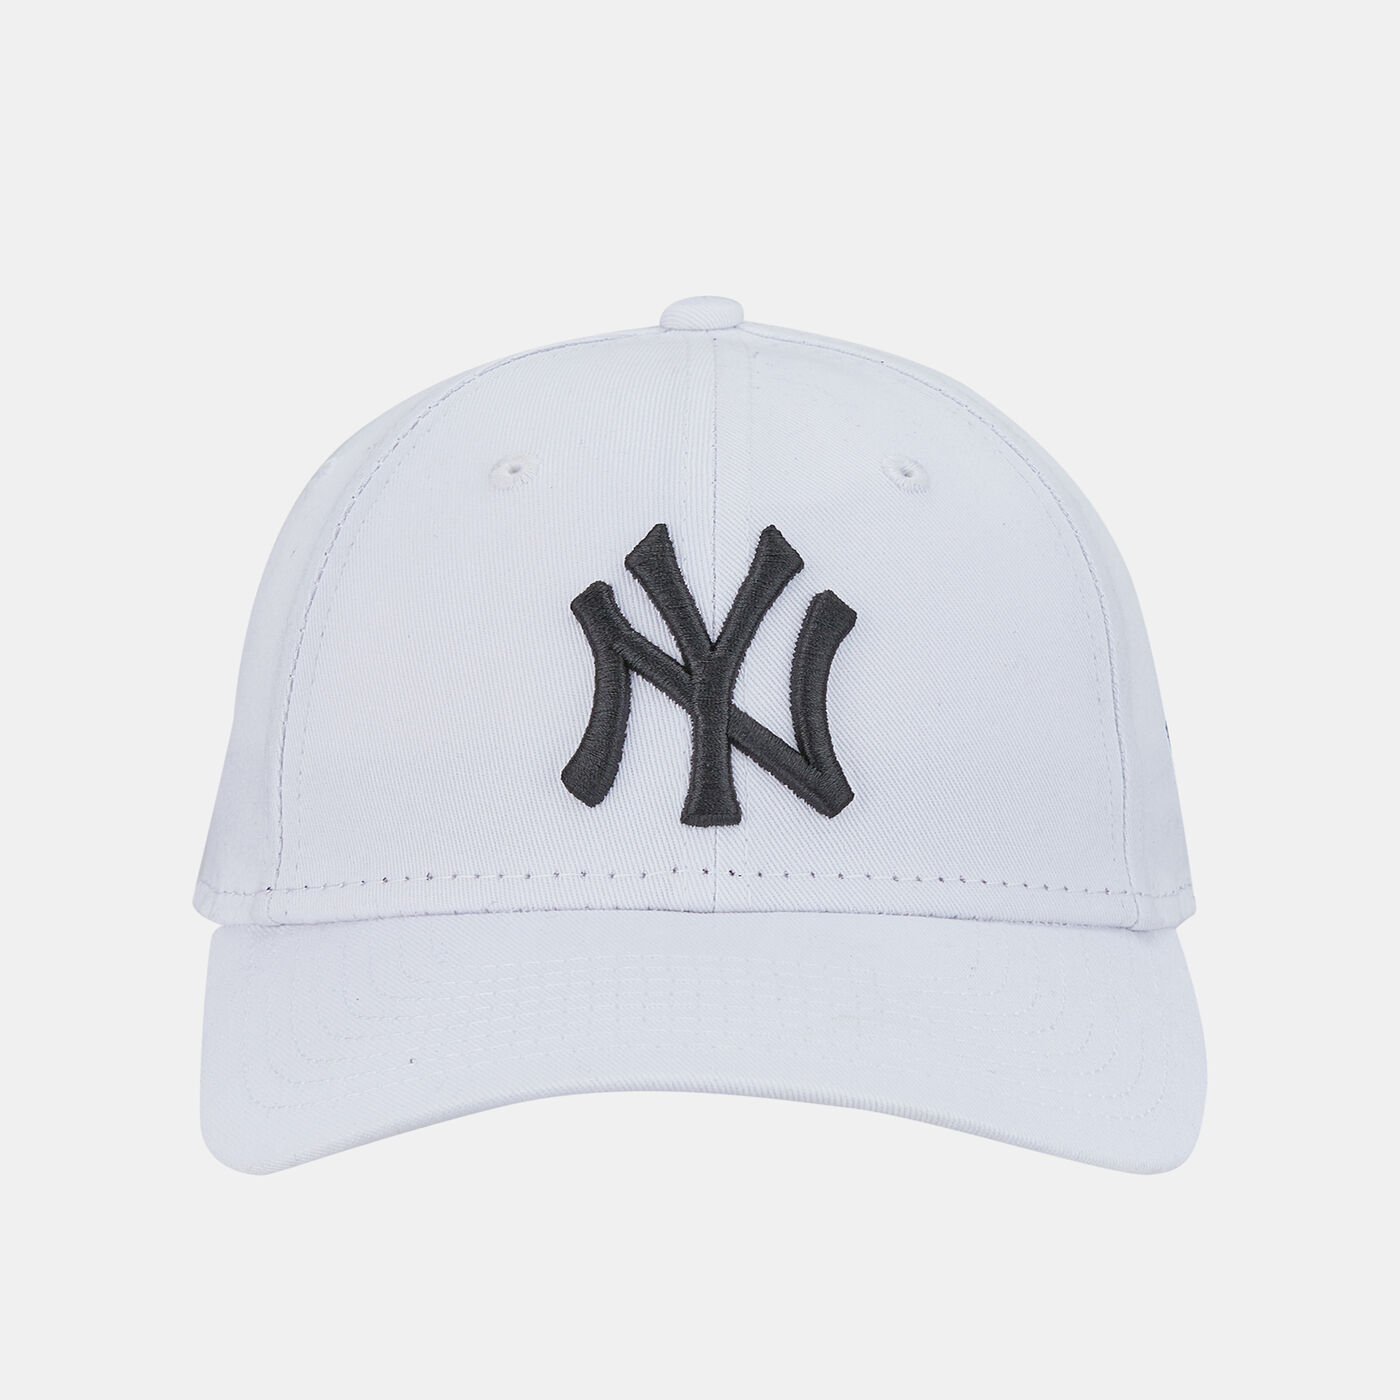 Kids' New York Yankees League Essential 9FORTY Cap